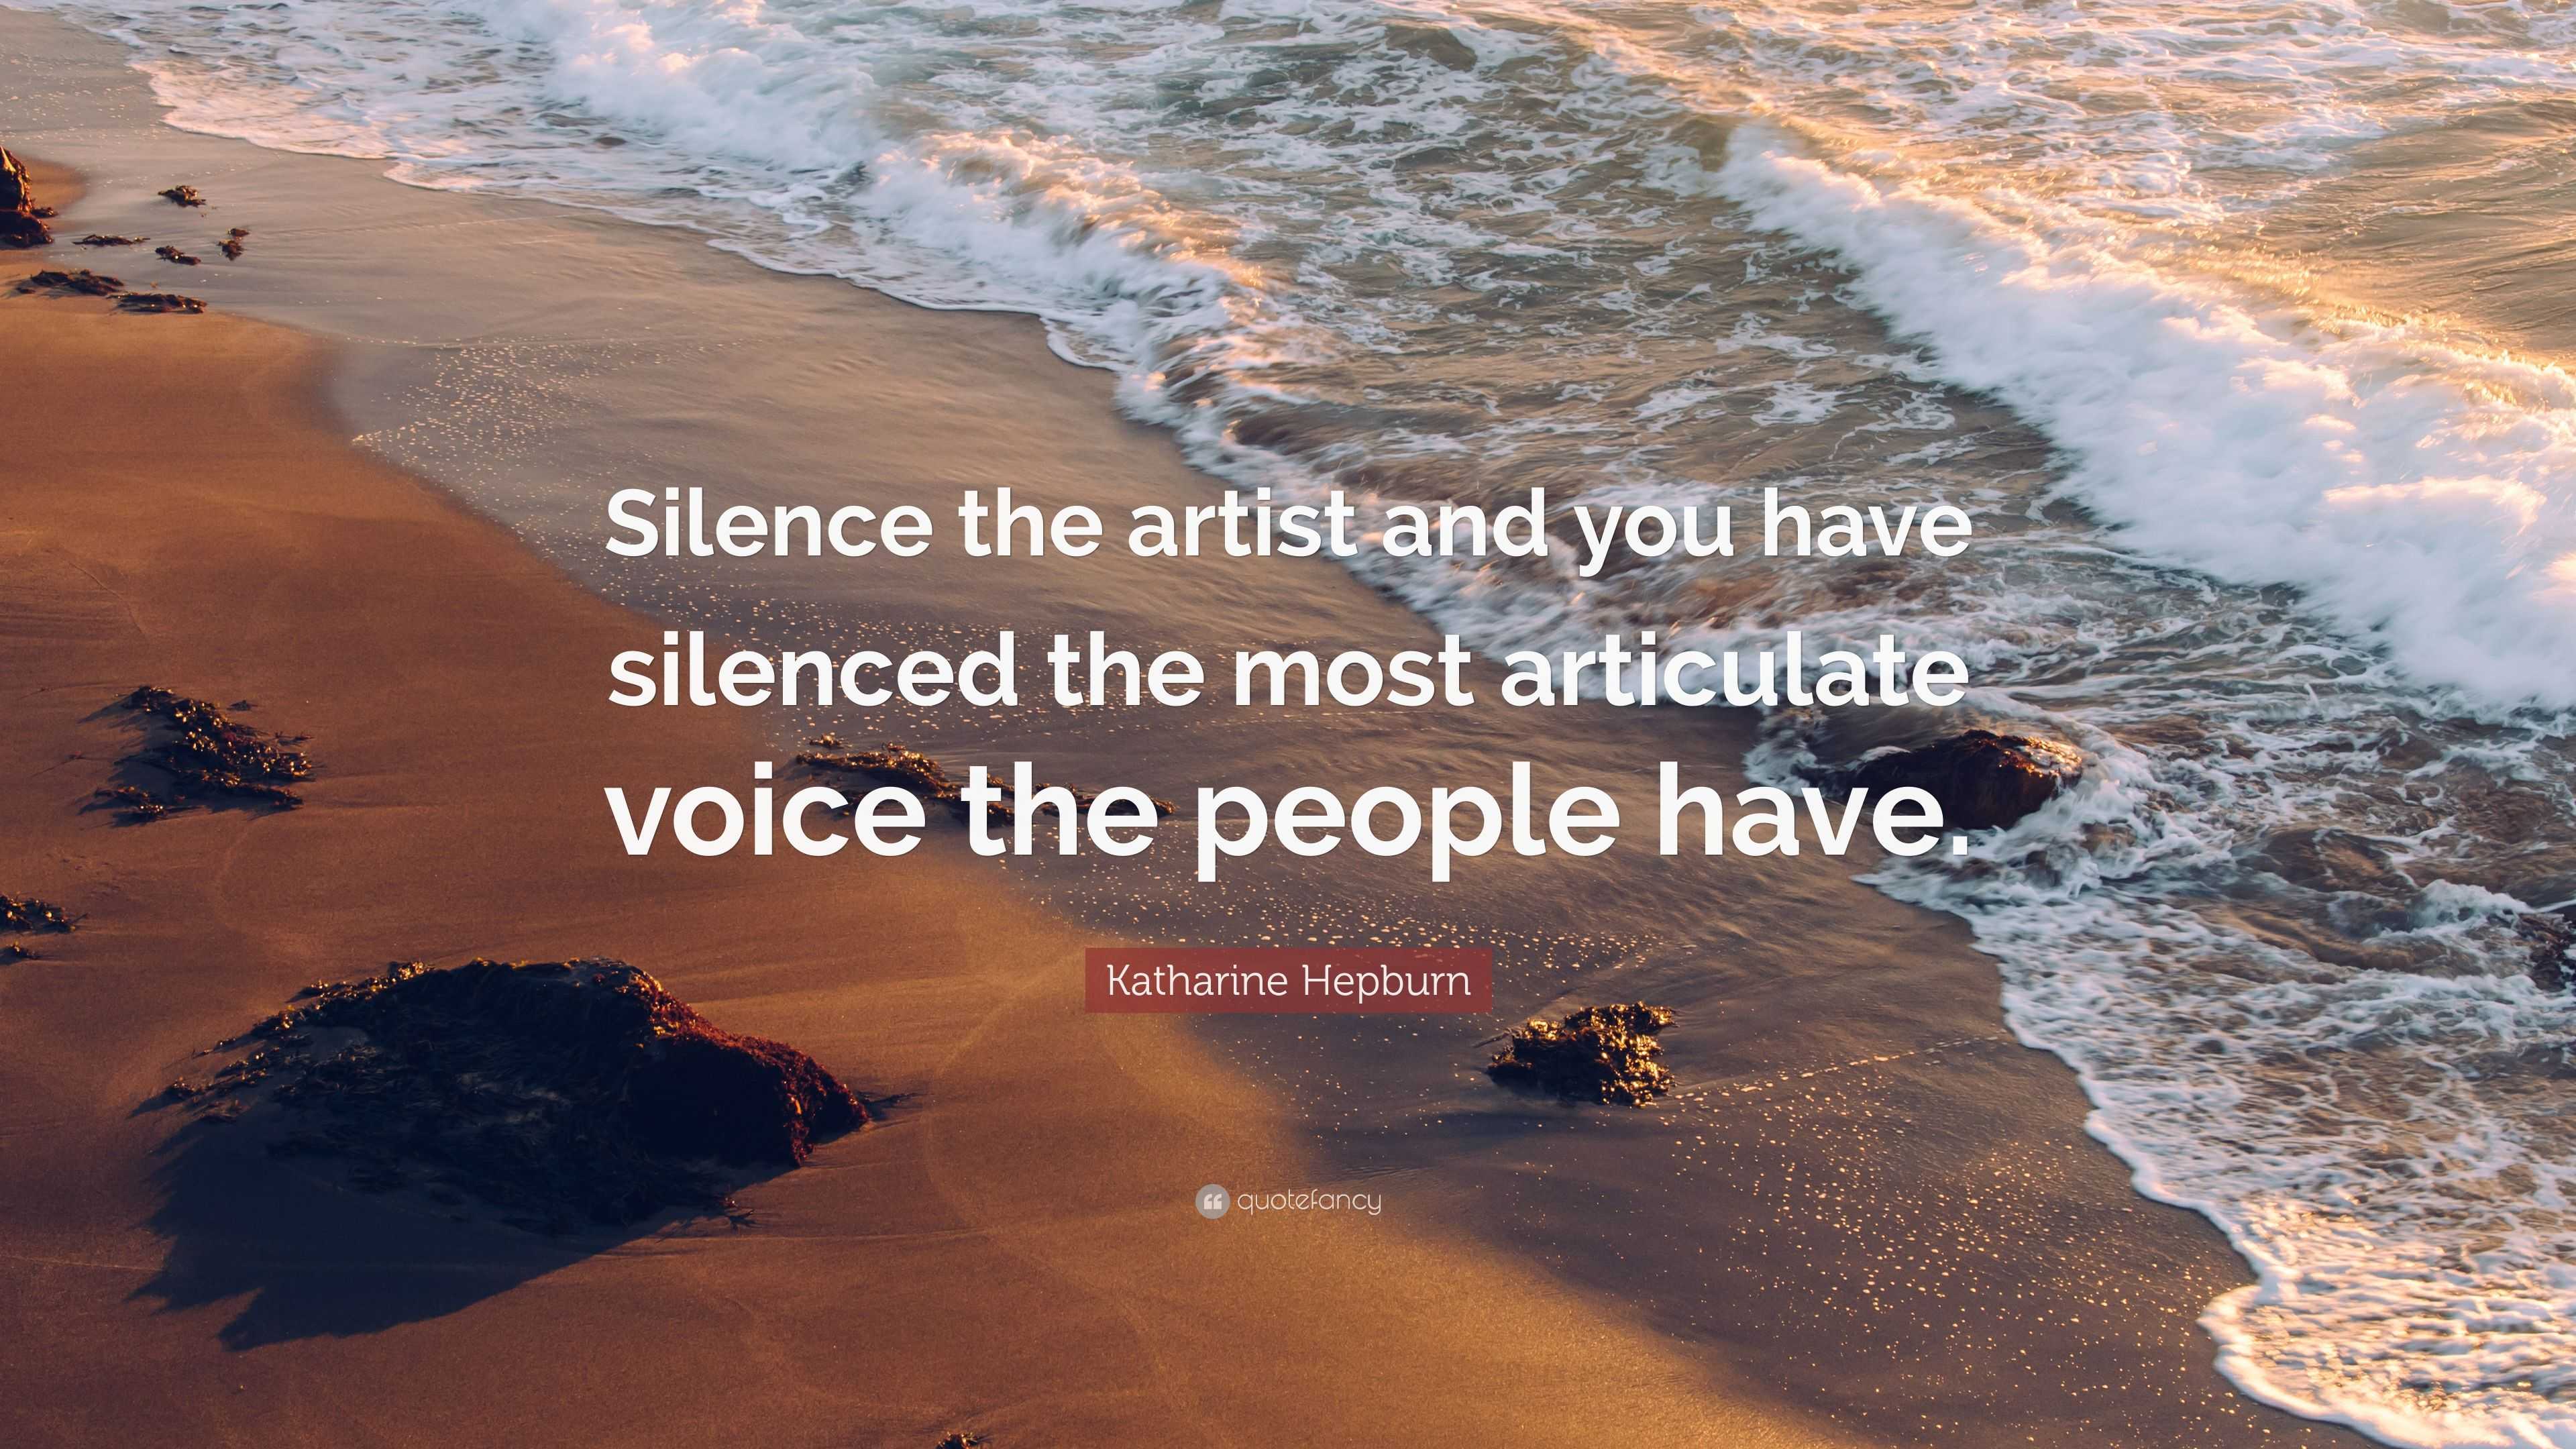 Katharine Hepburn Quote: “Silence the artist and you have silenced the ...